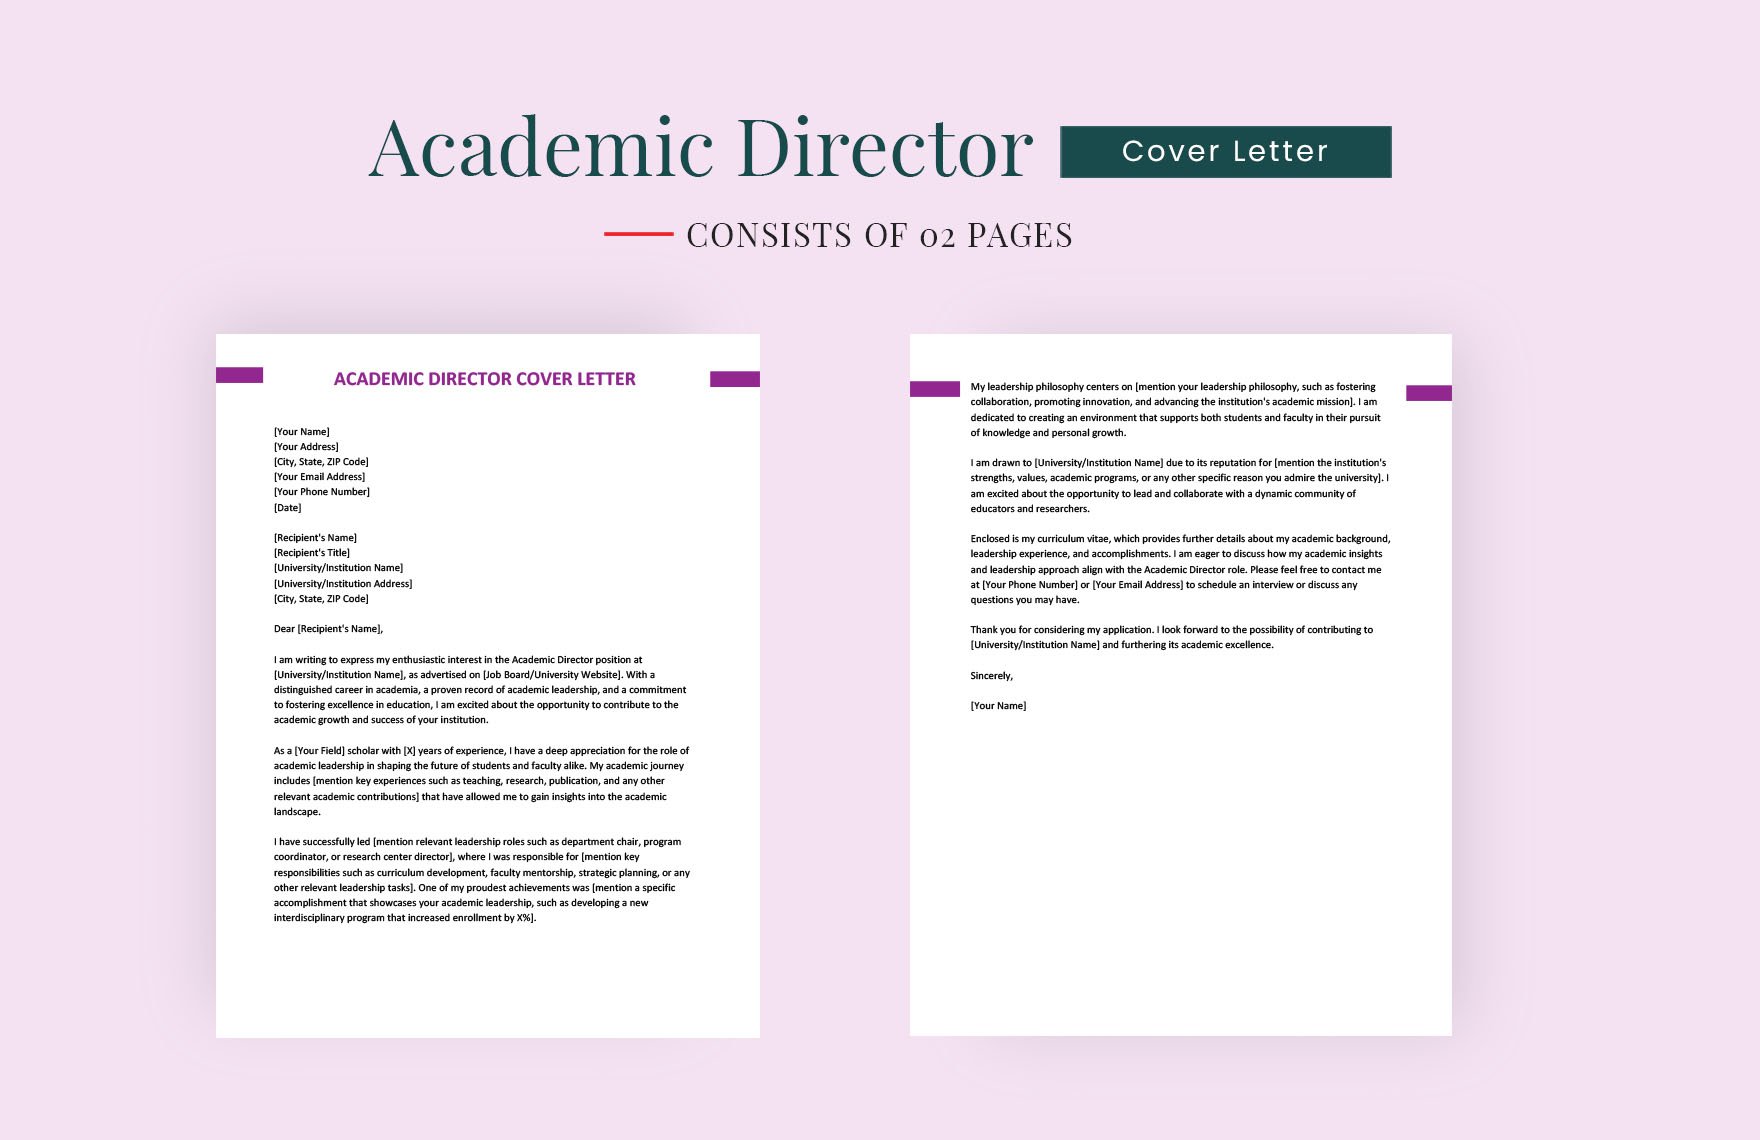 Academic Director Cover Letter